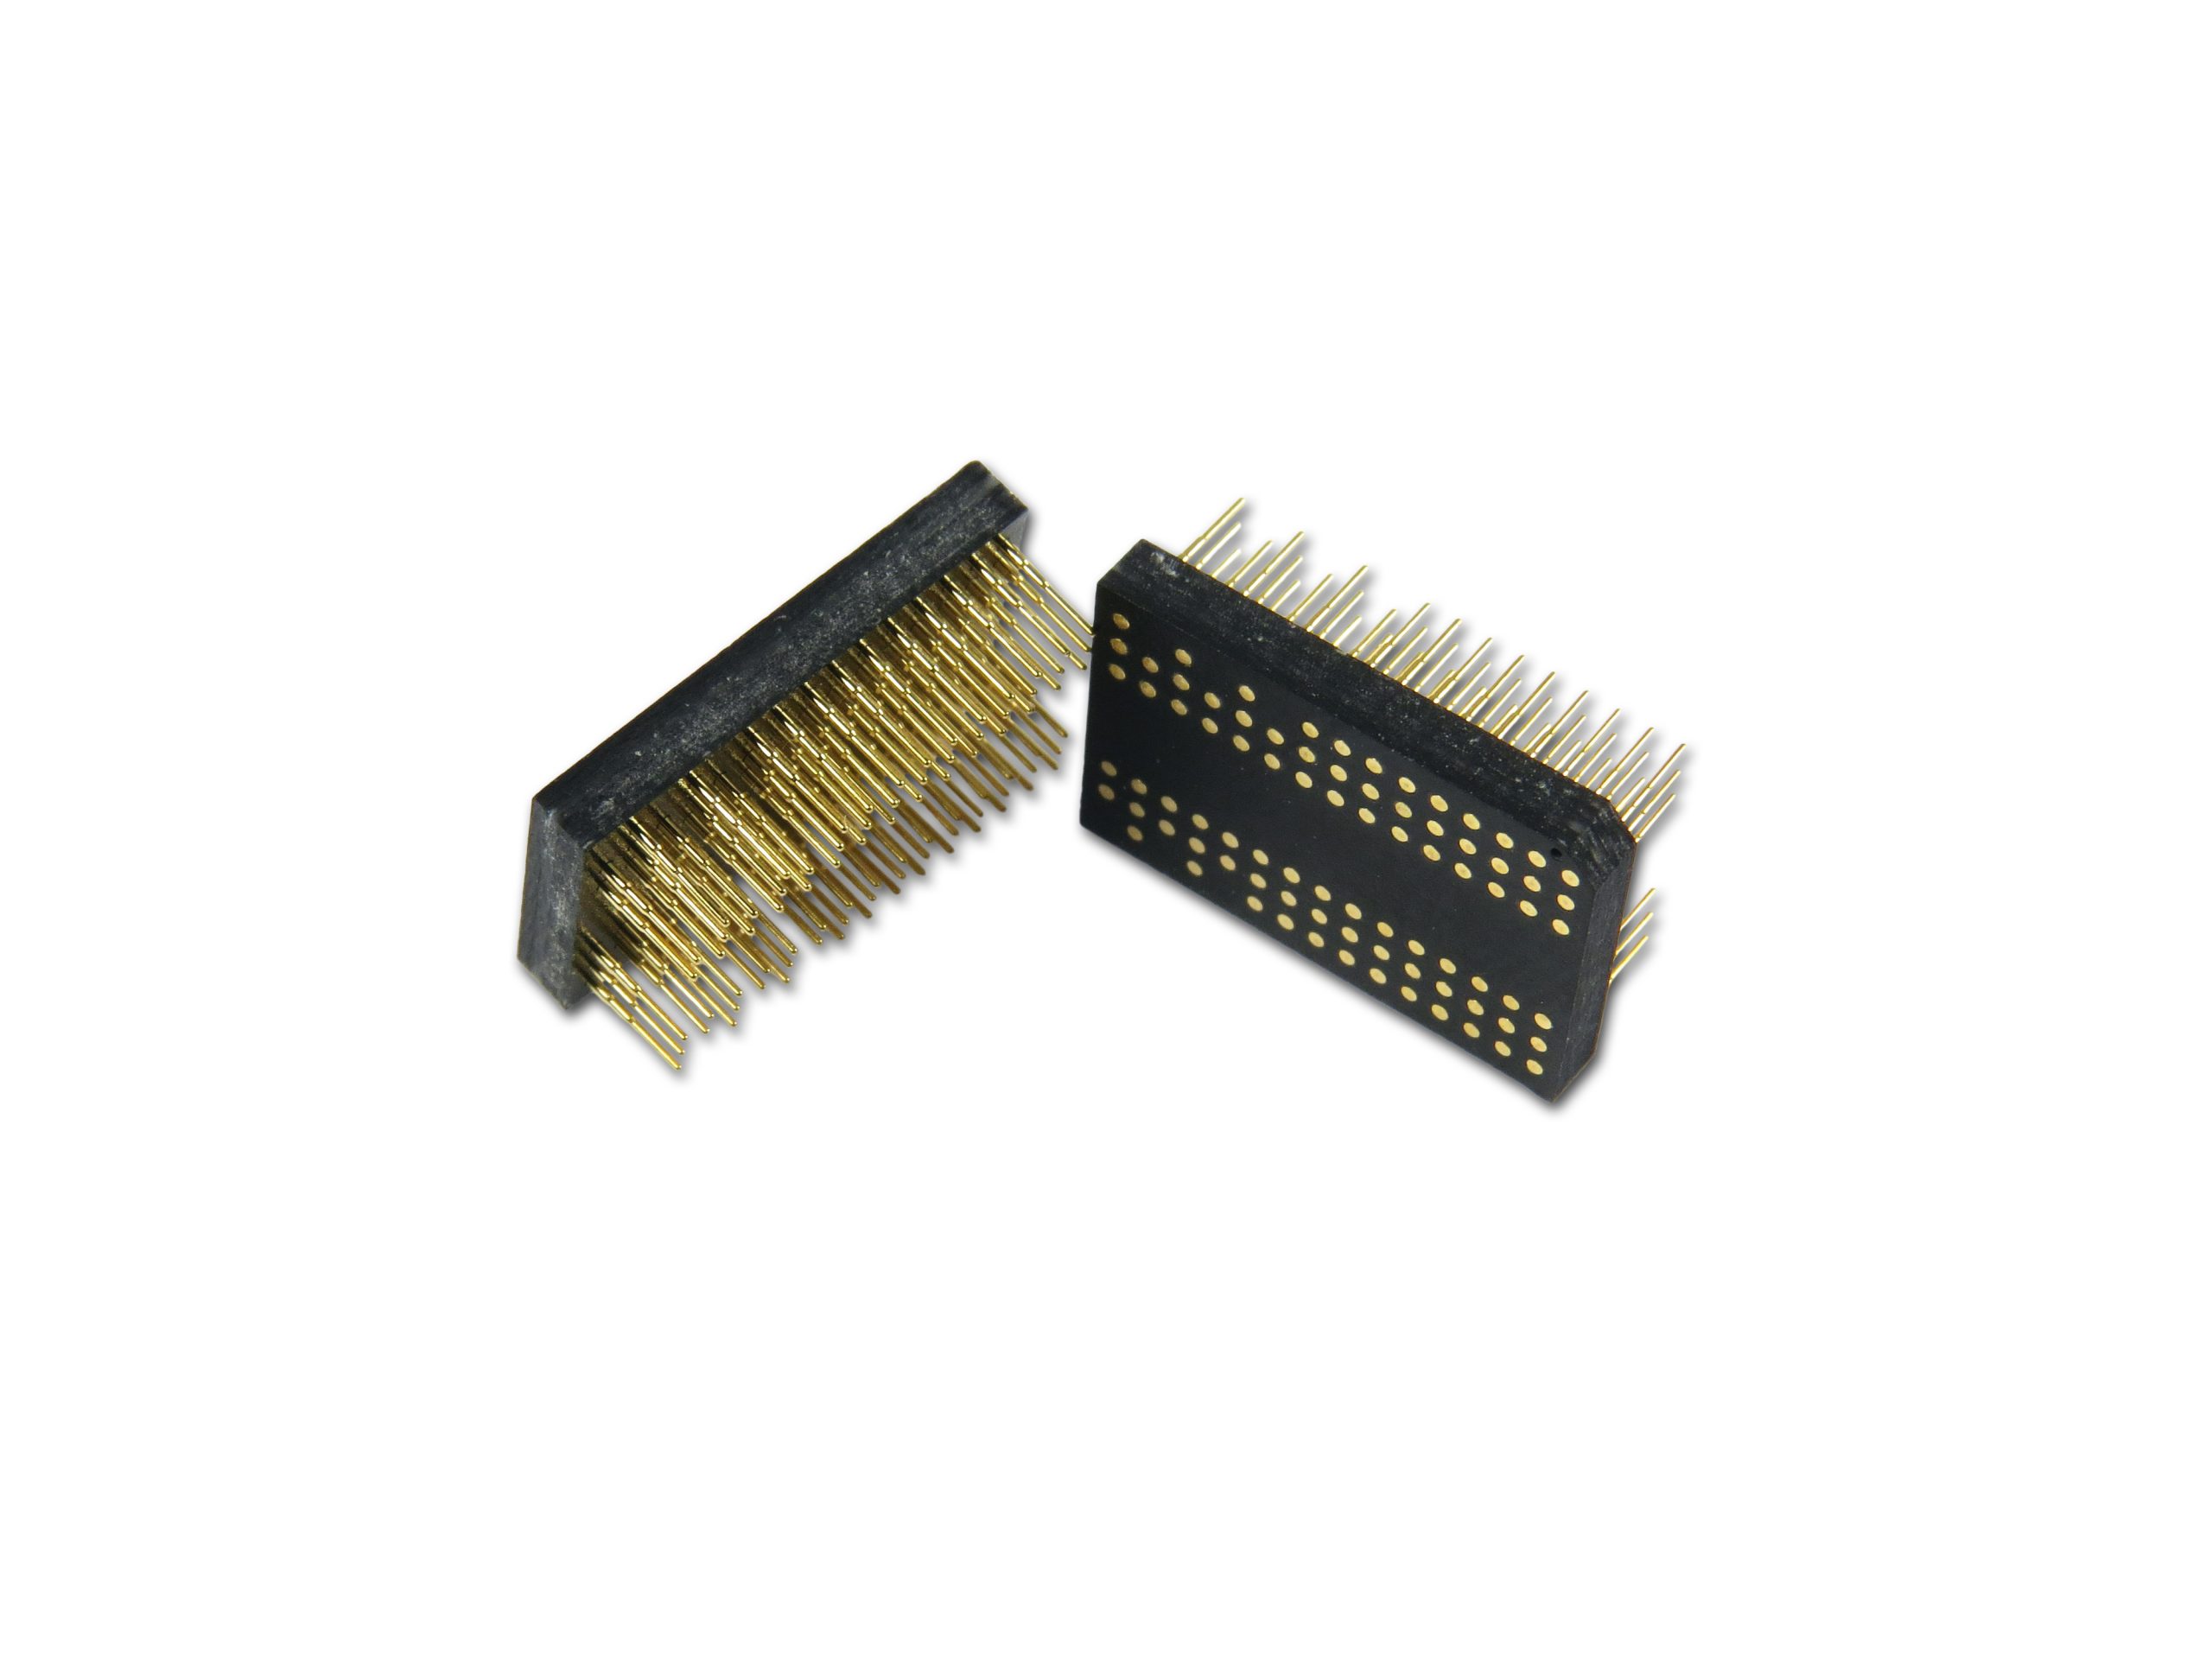 Chip Size, SMD Socket Adapter for 84 ball FBGA, 0.8mm Pitch DDR2 SDRAM